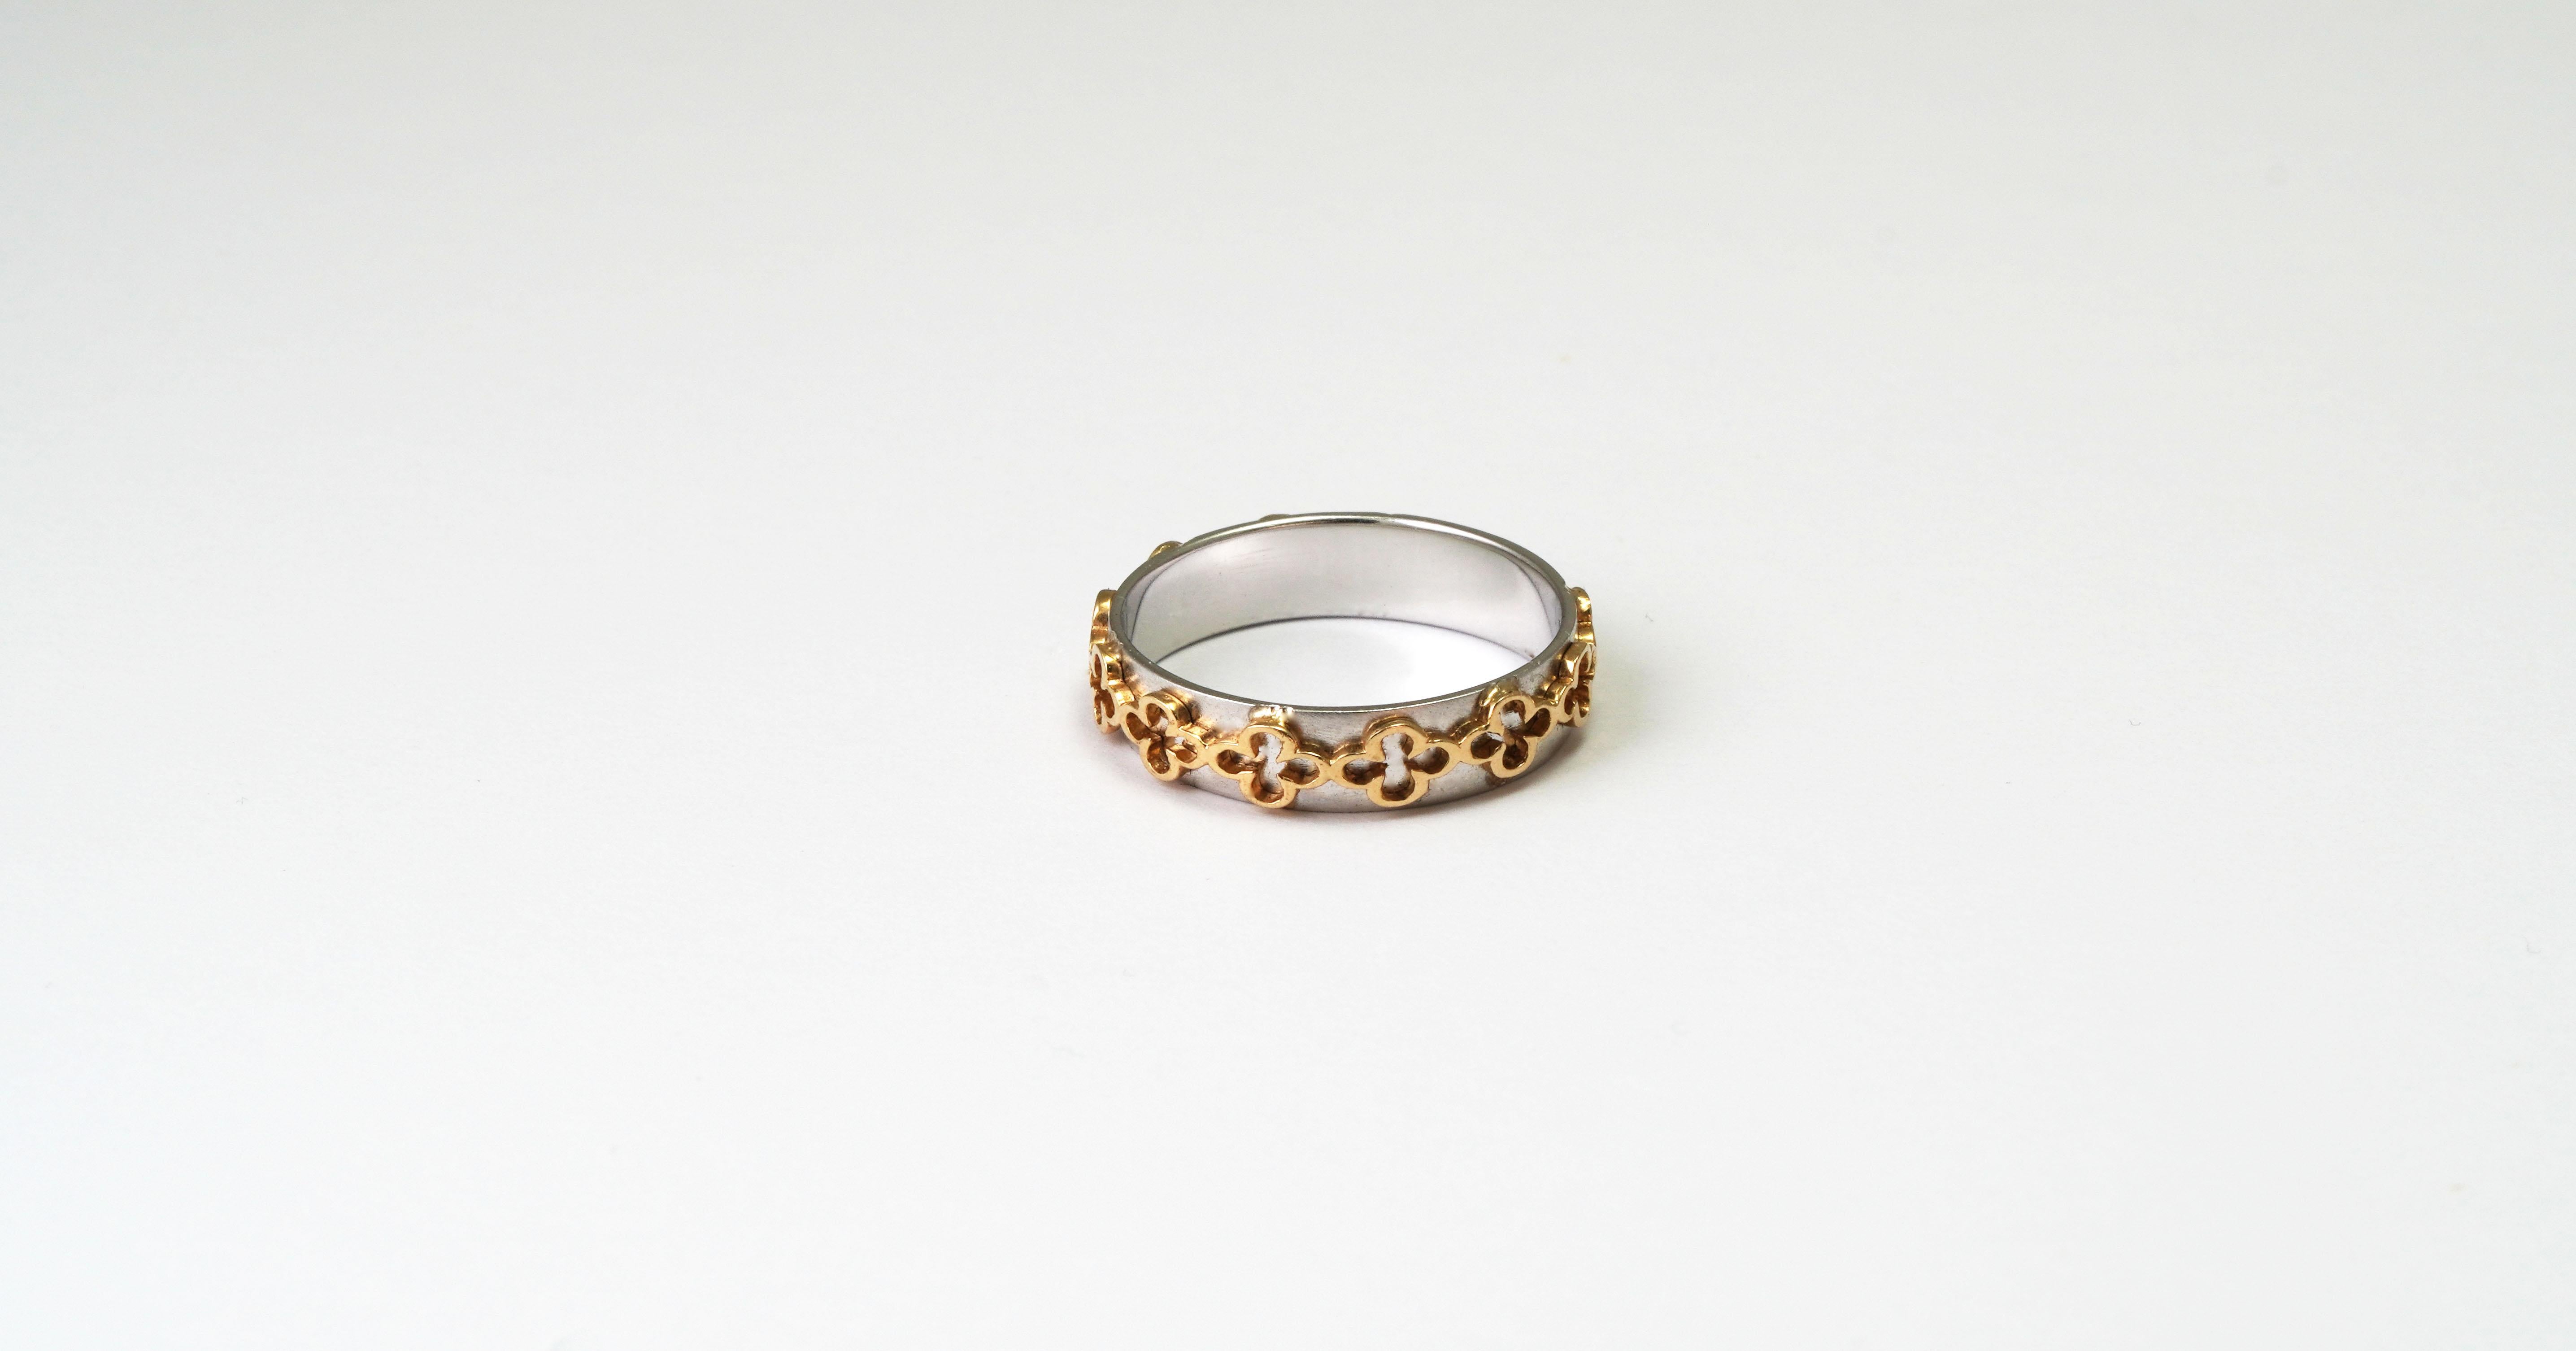 14 kt Gold ring
Gold color: White and Yellow
Ring size: 5
Total weight: 2.10 grams